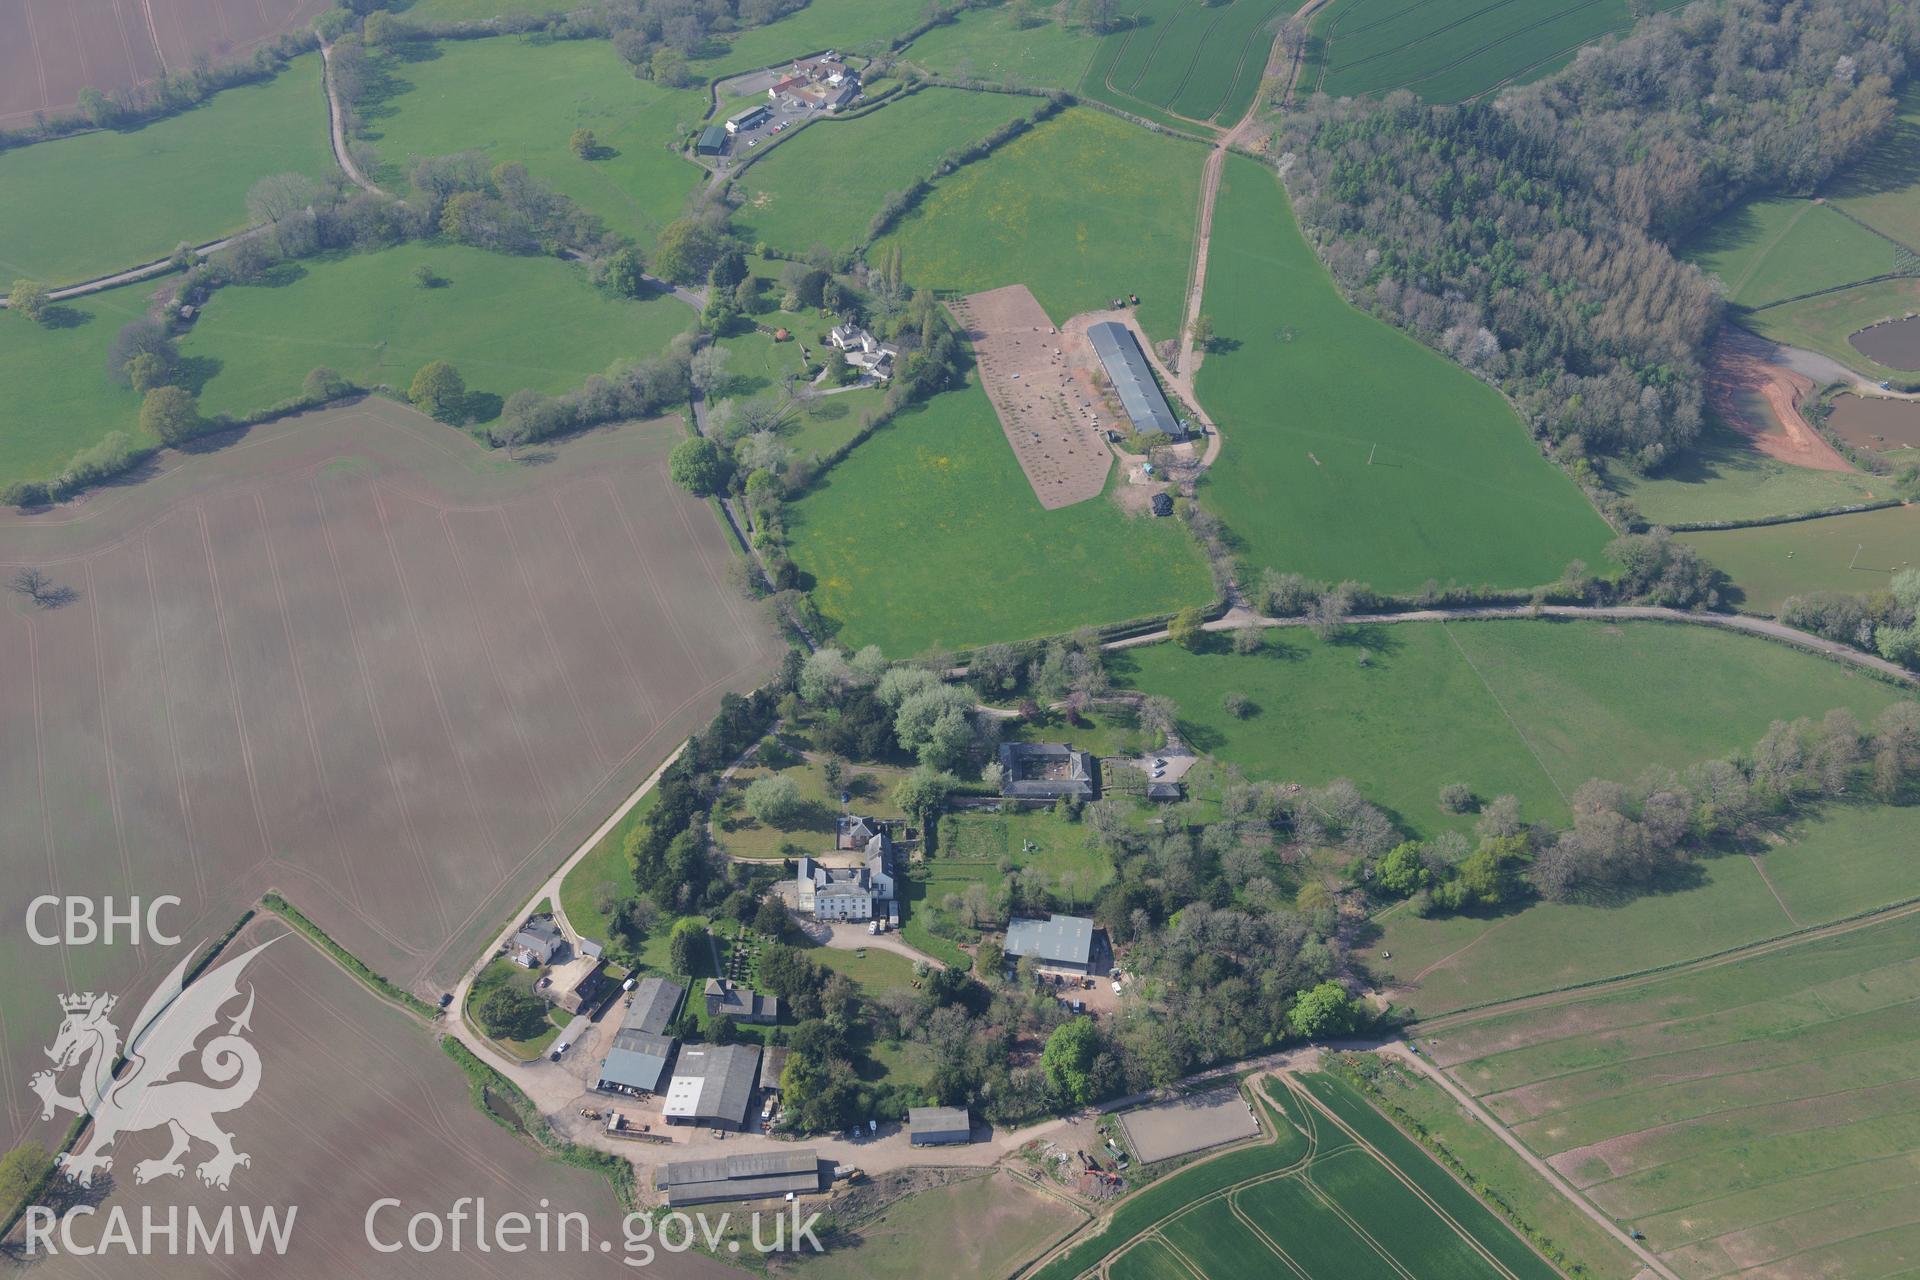 Wonastow Court and Garden, St Wonnow's Church and Vicarage, and Talocher Farm Roman Fort. Oblique aerial photograph taken during the Royal Commission's programme of archaeological aerial reconnaissance by Toby Driver on 21st April 2015